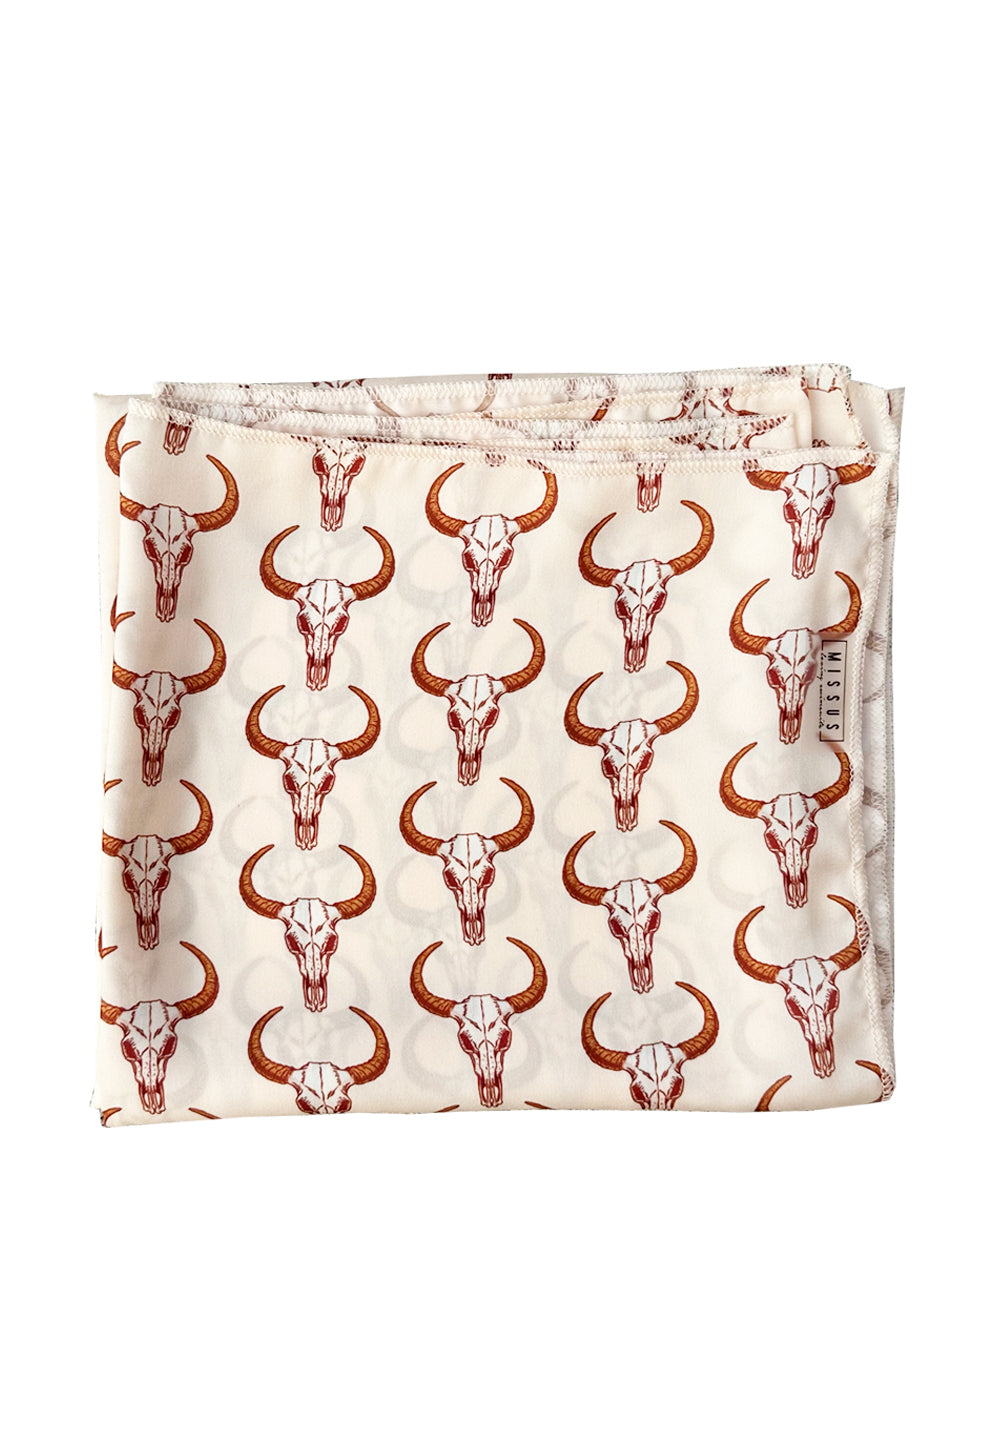 SILK SCARF SS'23 PHILI COLLECTION S8 (OUT OF STOCK)